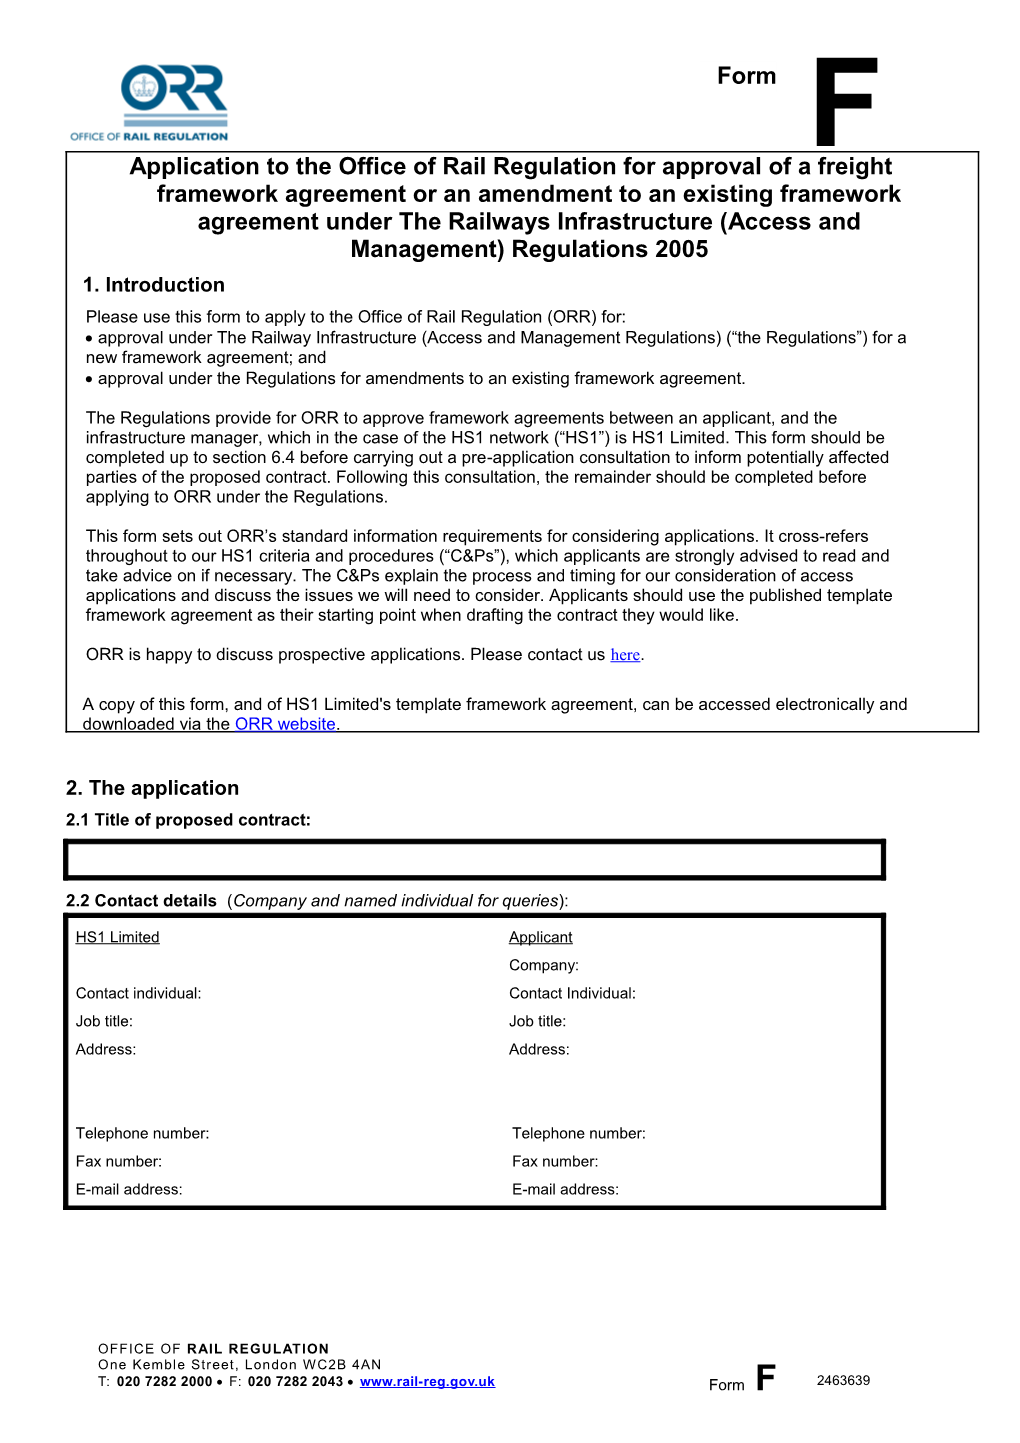 Form F - Application for Approval of a Freight Framework Agreement